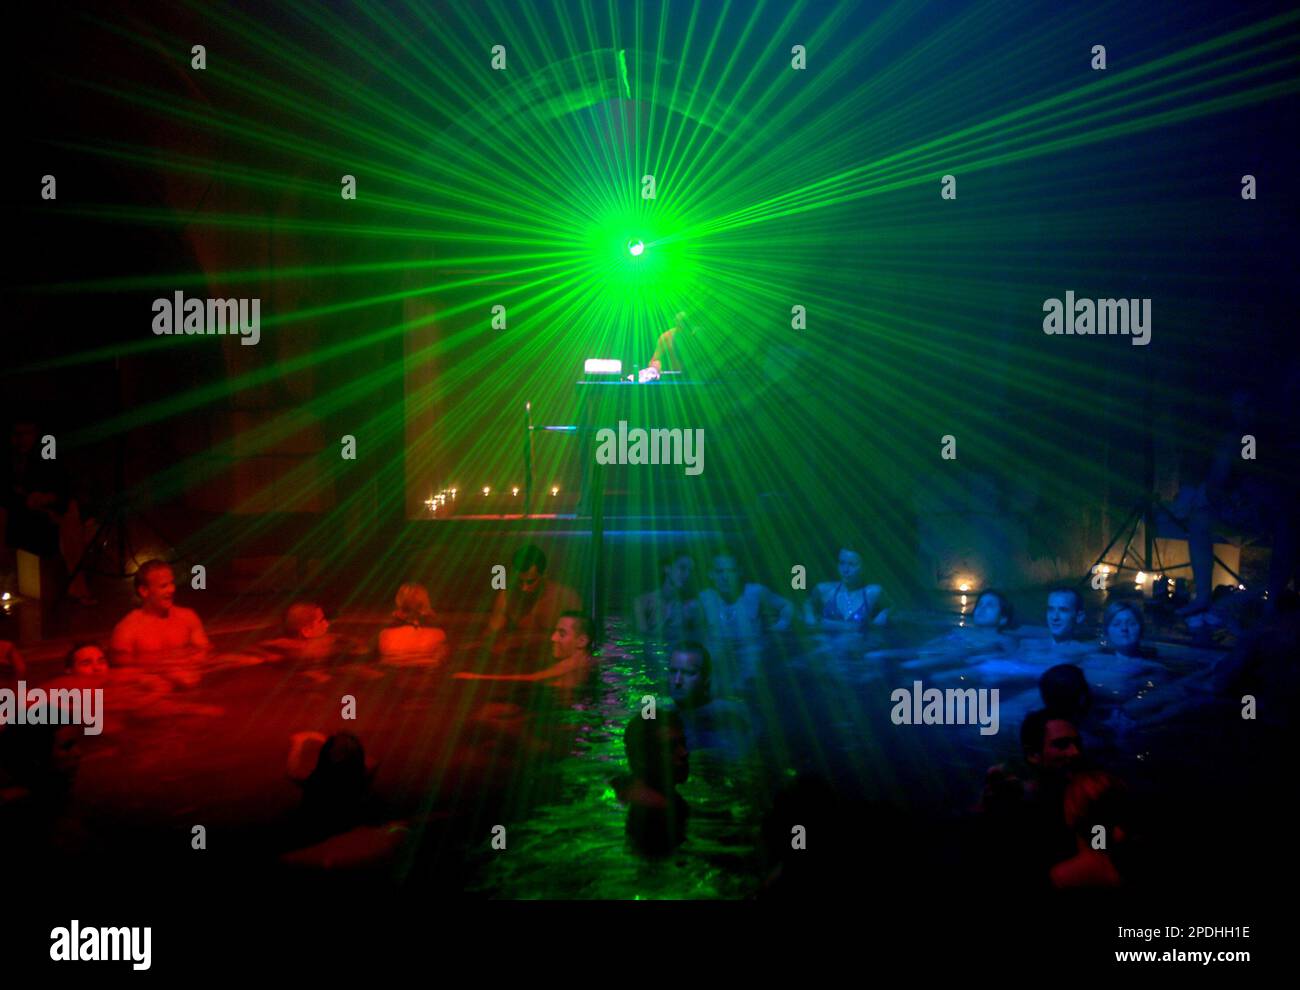 Under laser lights party goers relax in thermal waters during a rave style  party which combines music, film and performance, inside the Kiraly Bath in  Budapest, Hungary in the early morning hours